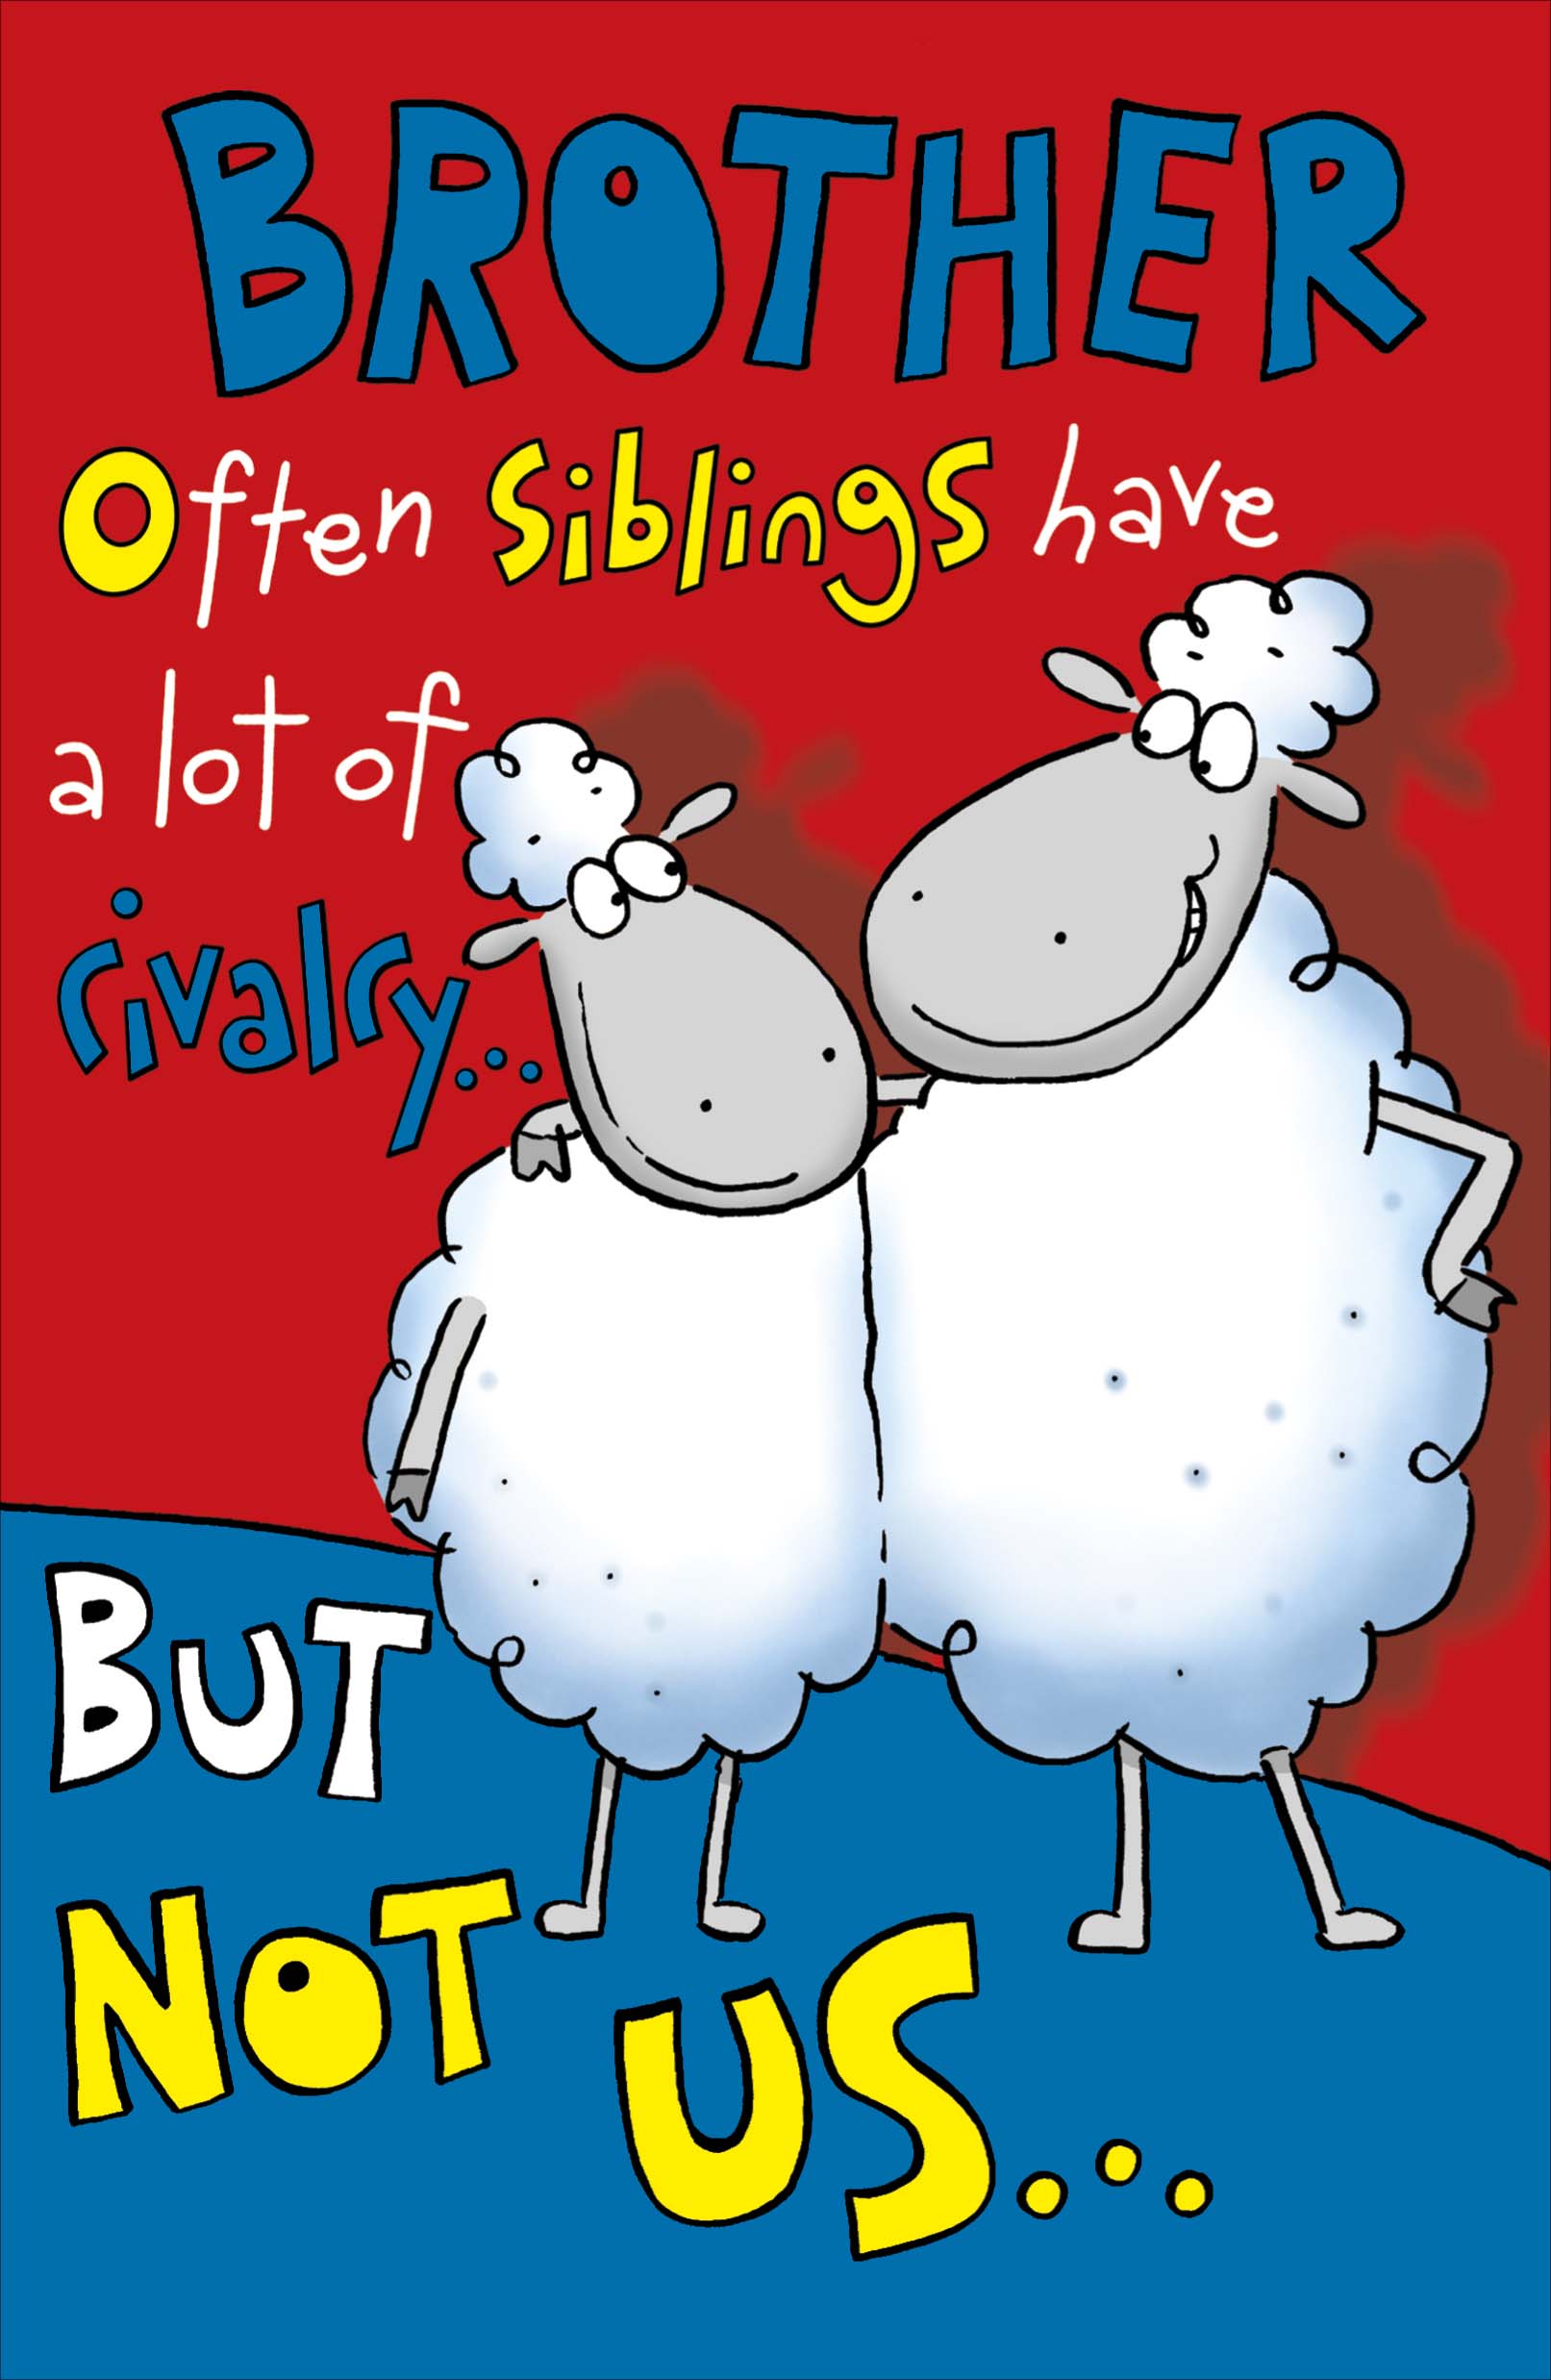 Front of Birthday Brother Siblings Rivalry Funny Greetings Card